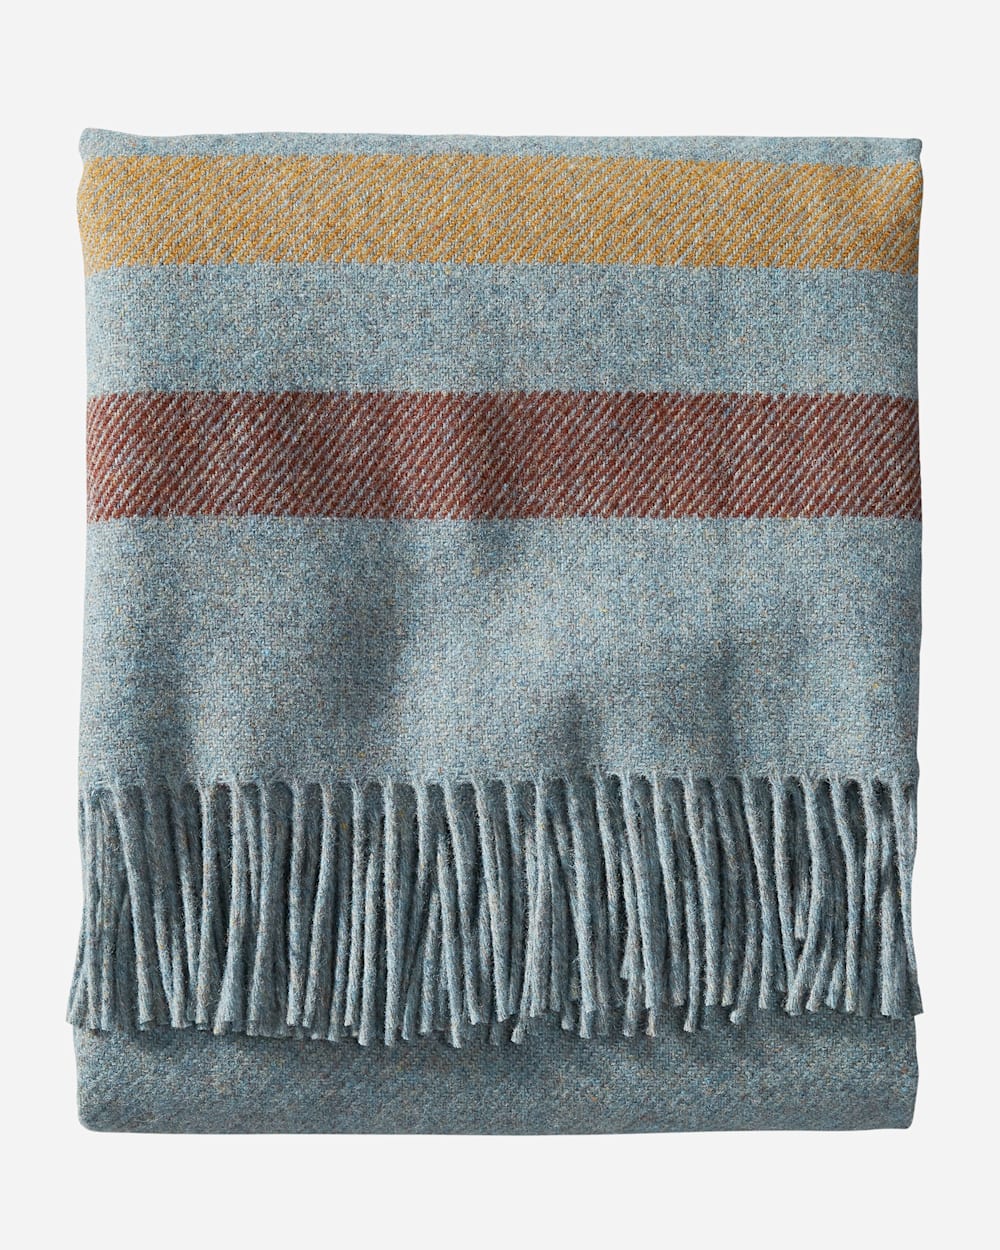 ALTERNATE VIEW OF ECO-WISE WOOL FRINGED THROW IN SHALE STRIPE image number 2